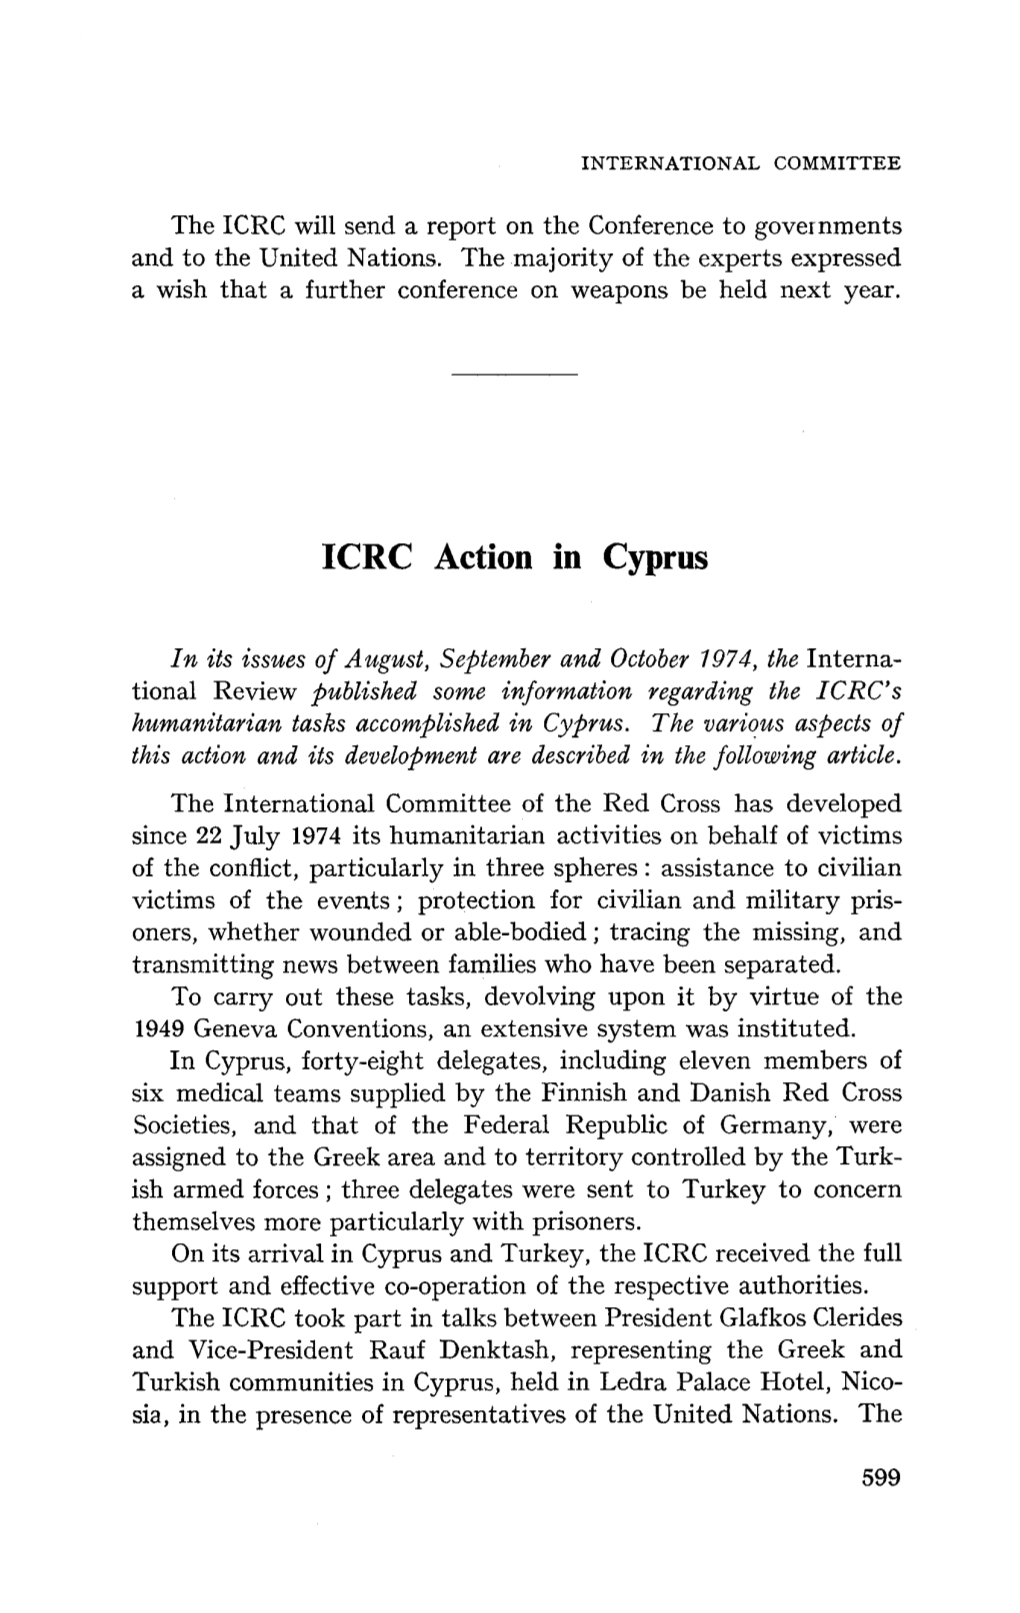 ICRC Action in Cyprus